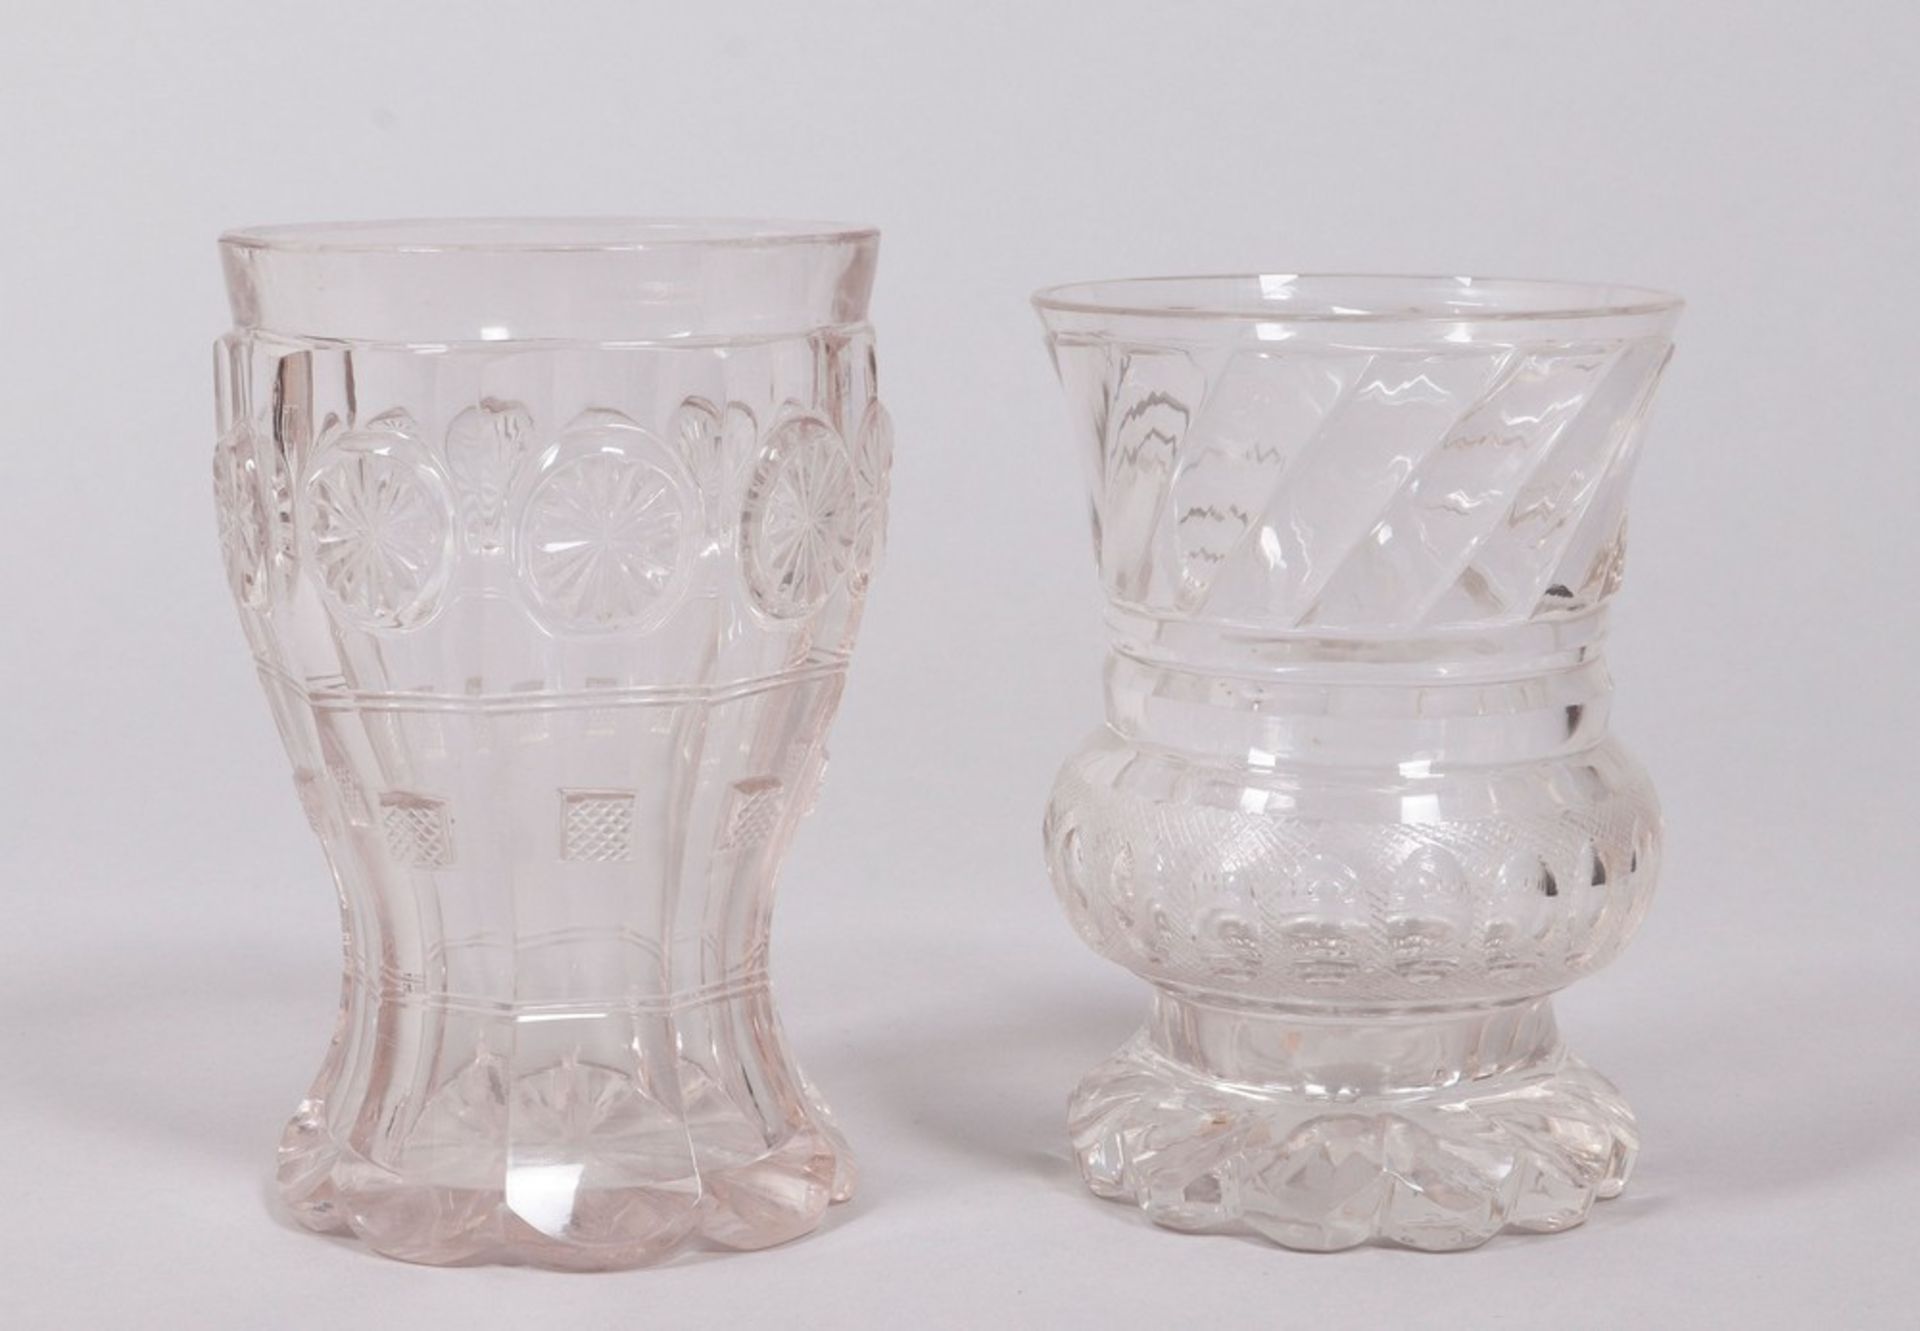 Mixed lot of Biedermeier glasses, 5 pieces, colorless, German, 19th C. - Image 3 of 6